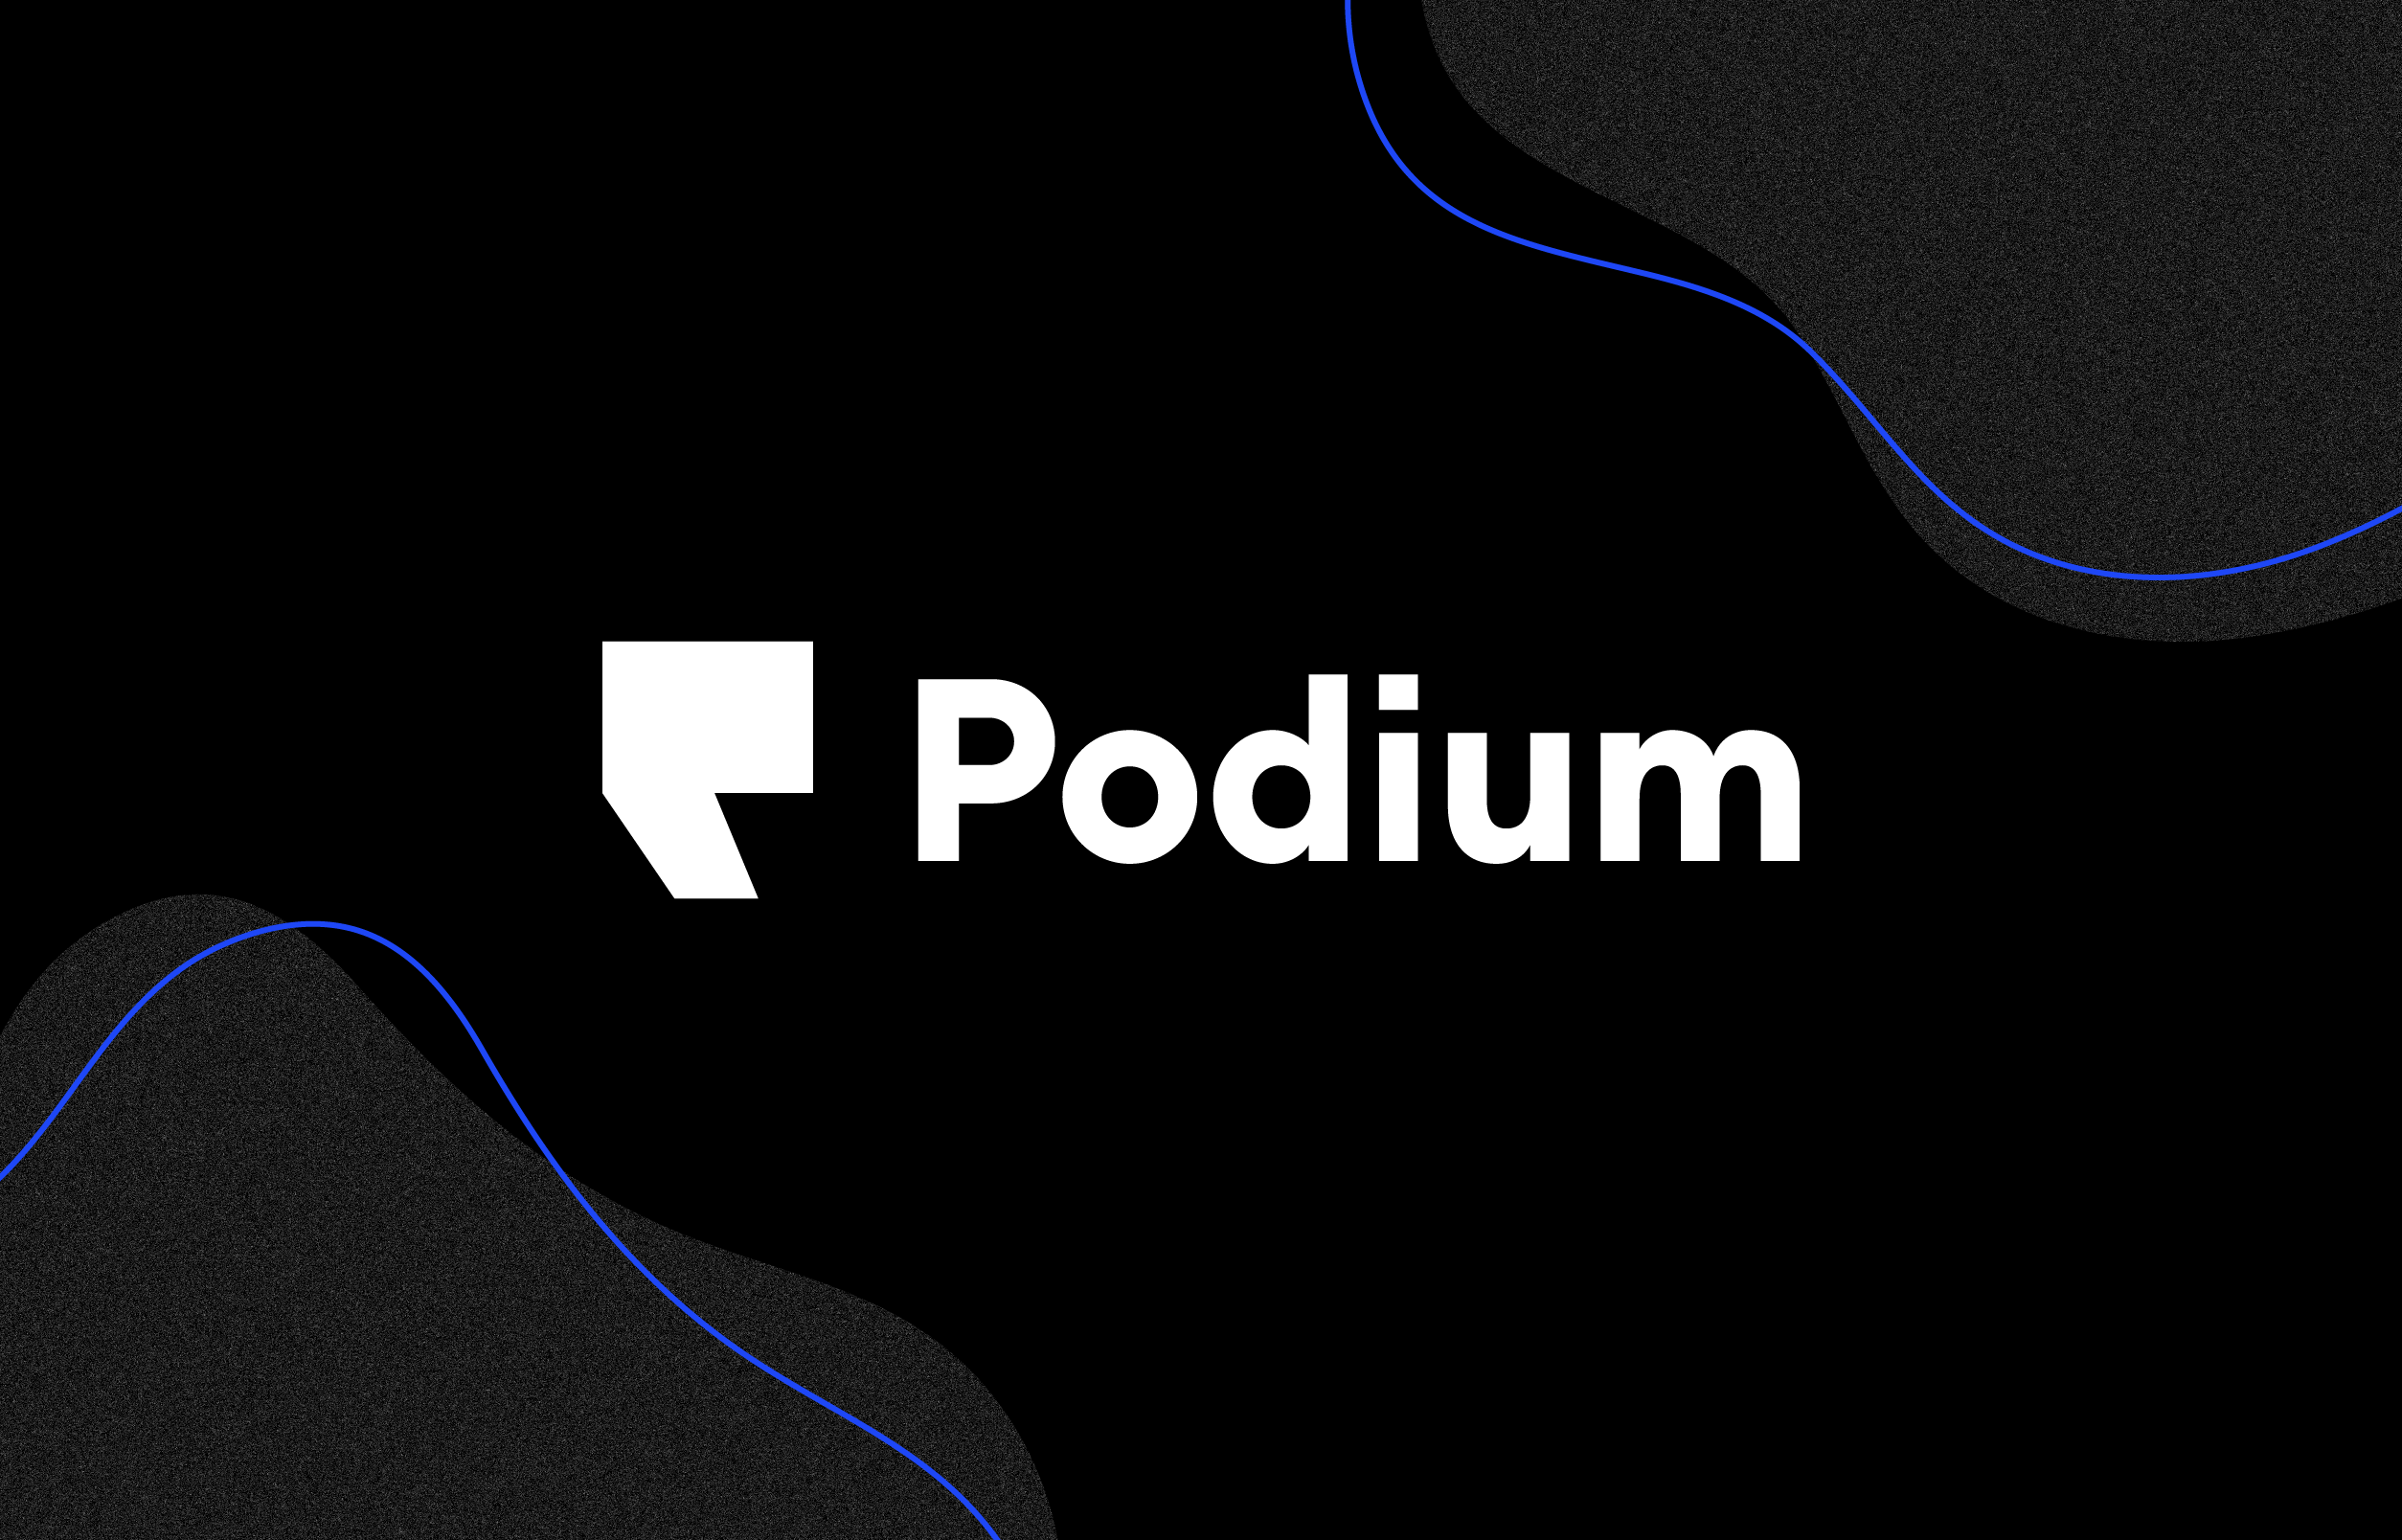 High Five Media partners with Podium to drive more value to clients